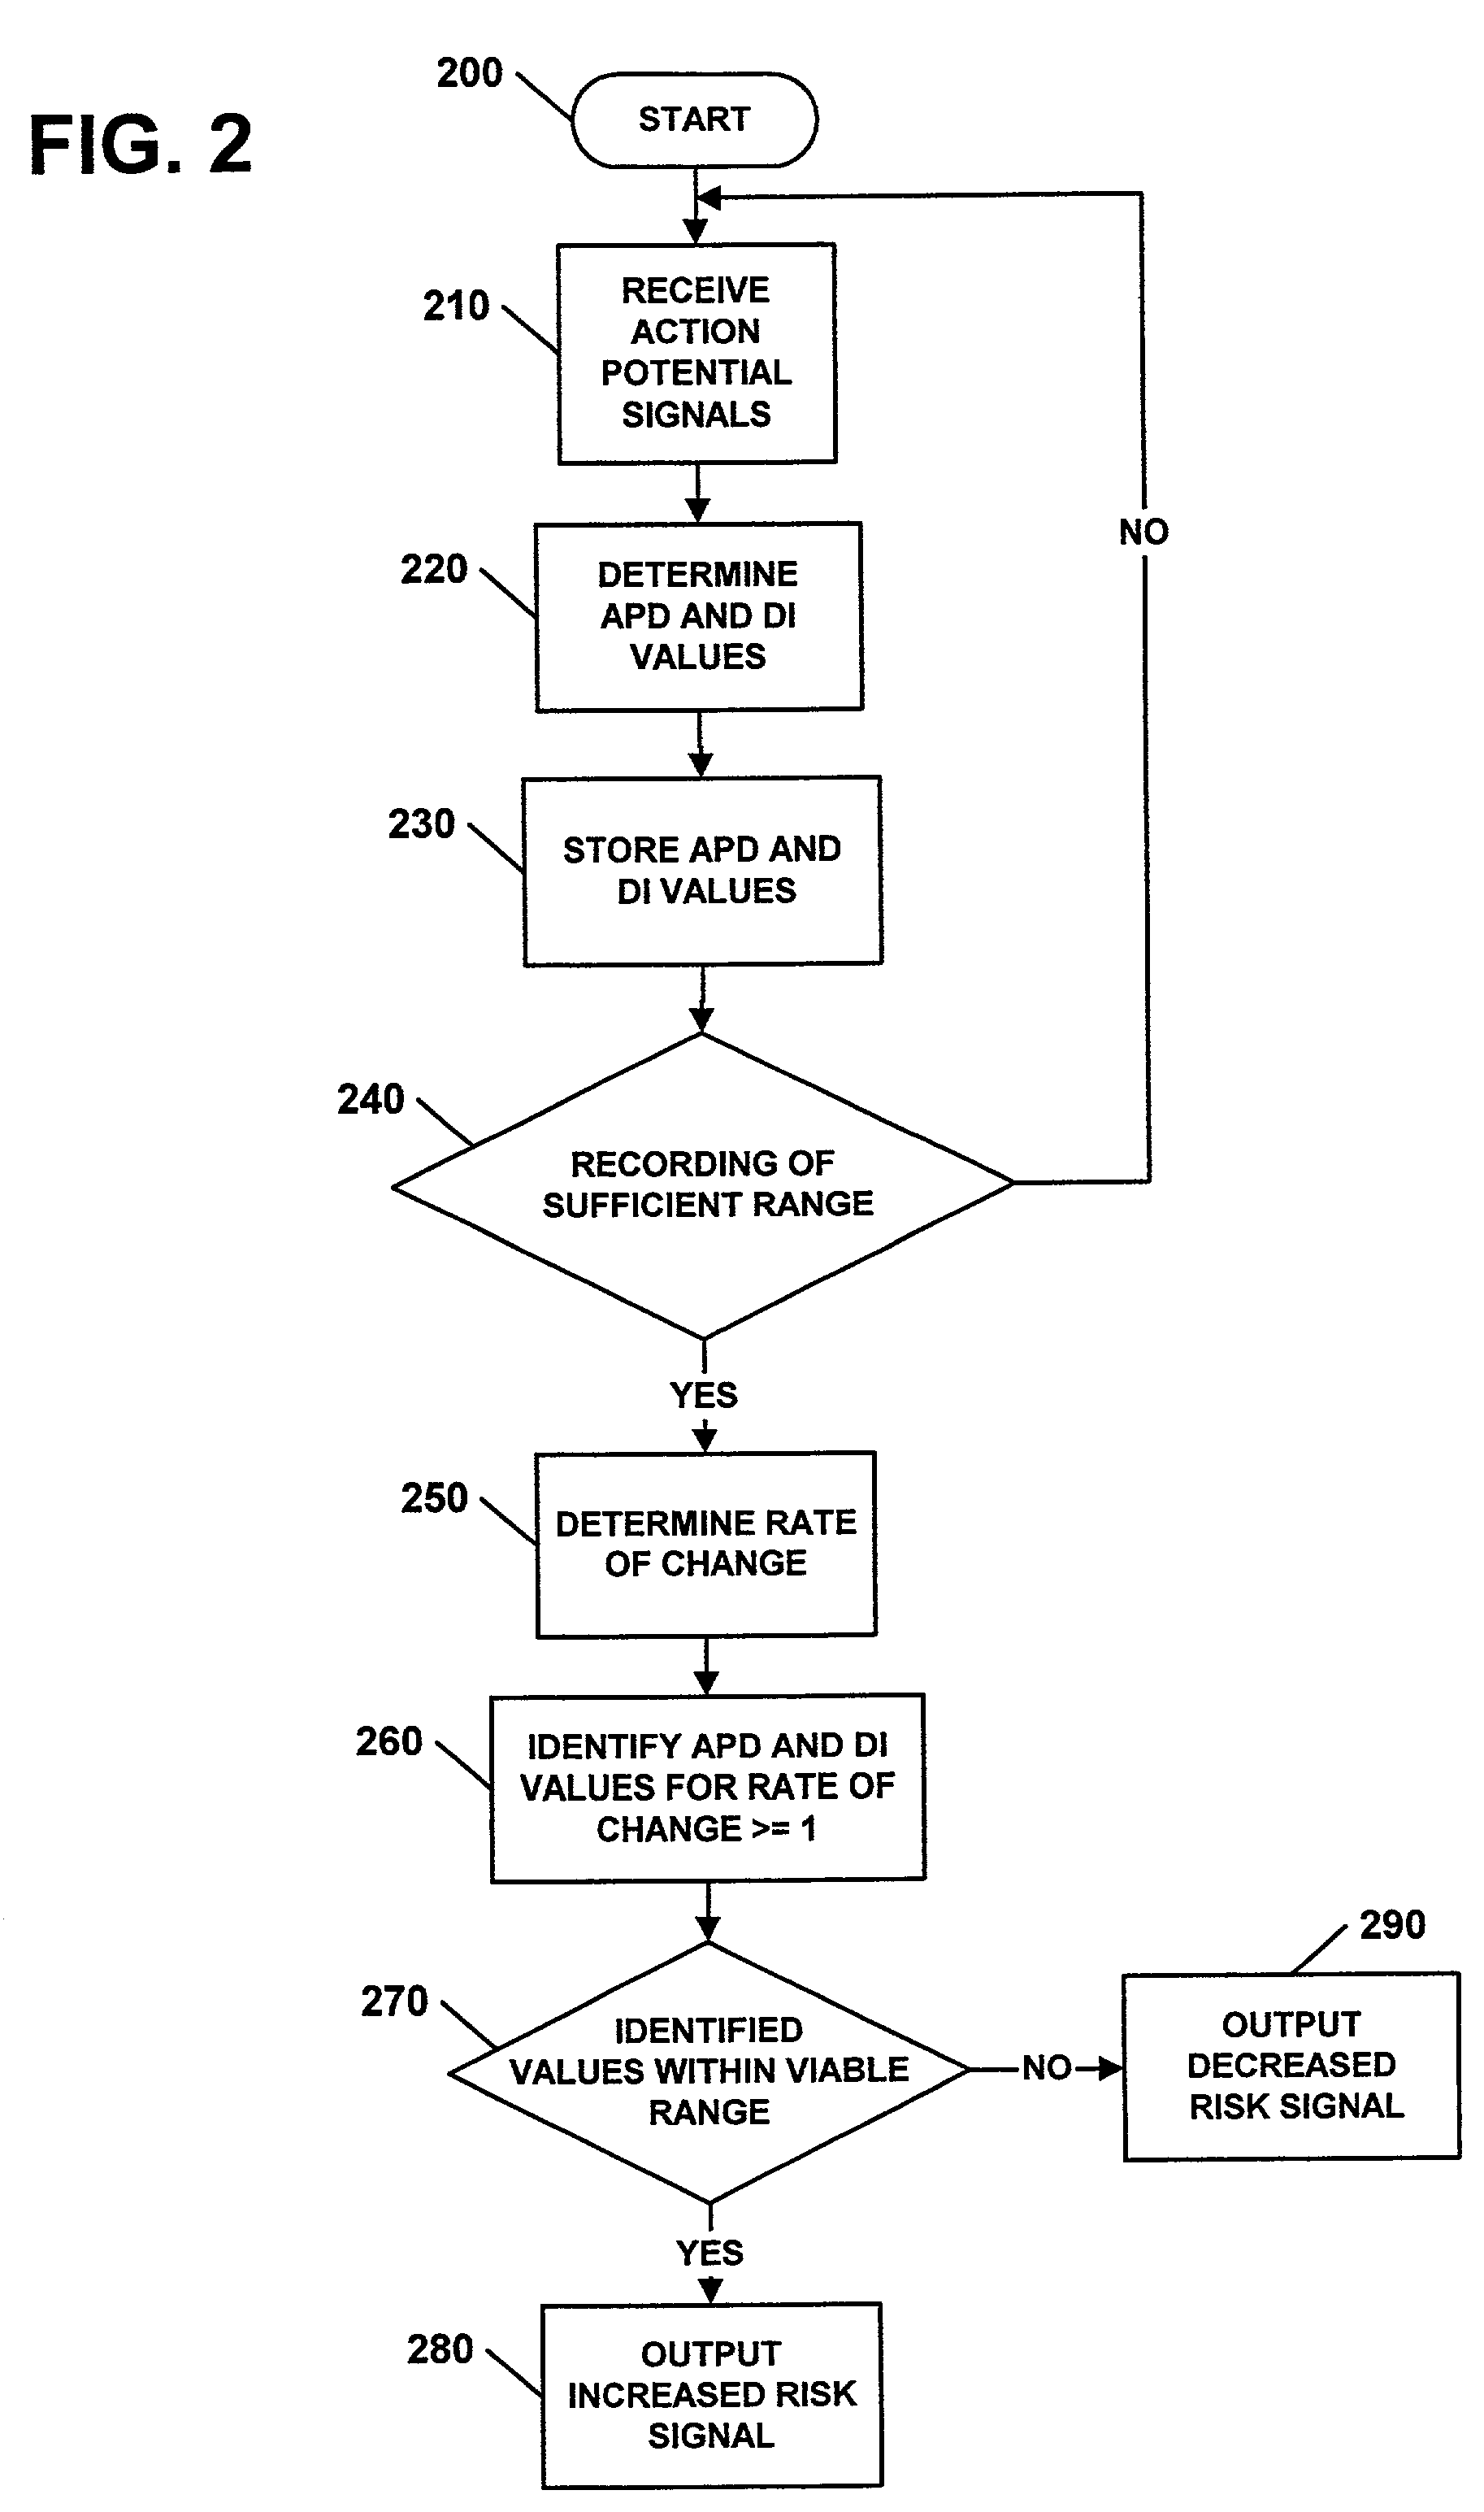 Apparatus, methods, and computer program products for evaluating a risk of cardiac arrhythmias from restitution properties